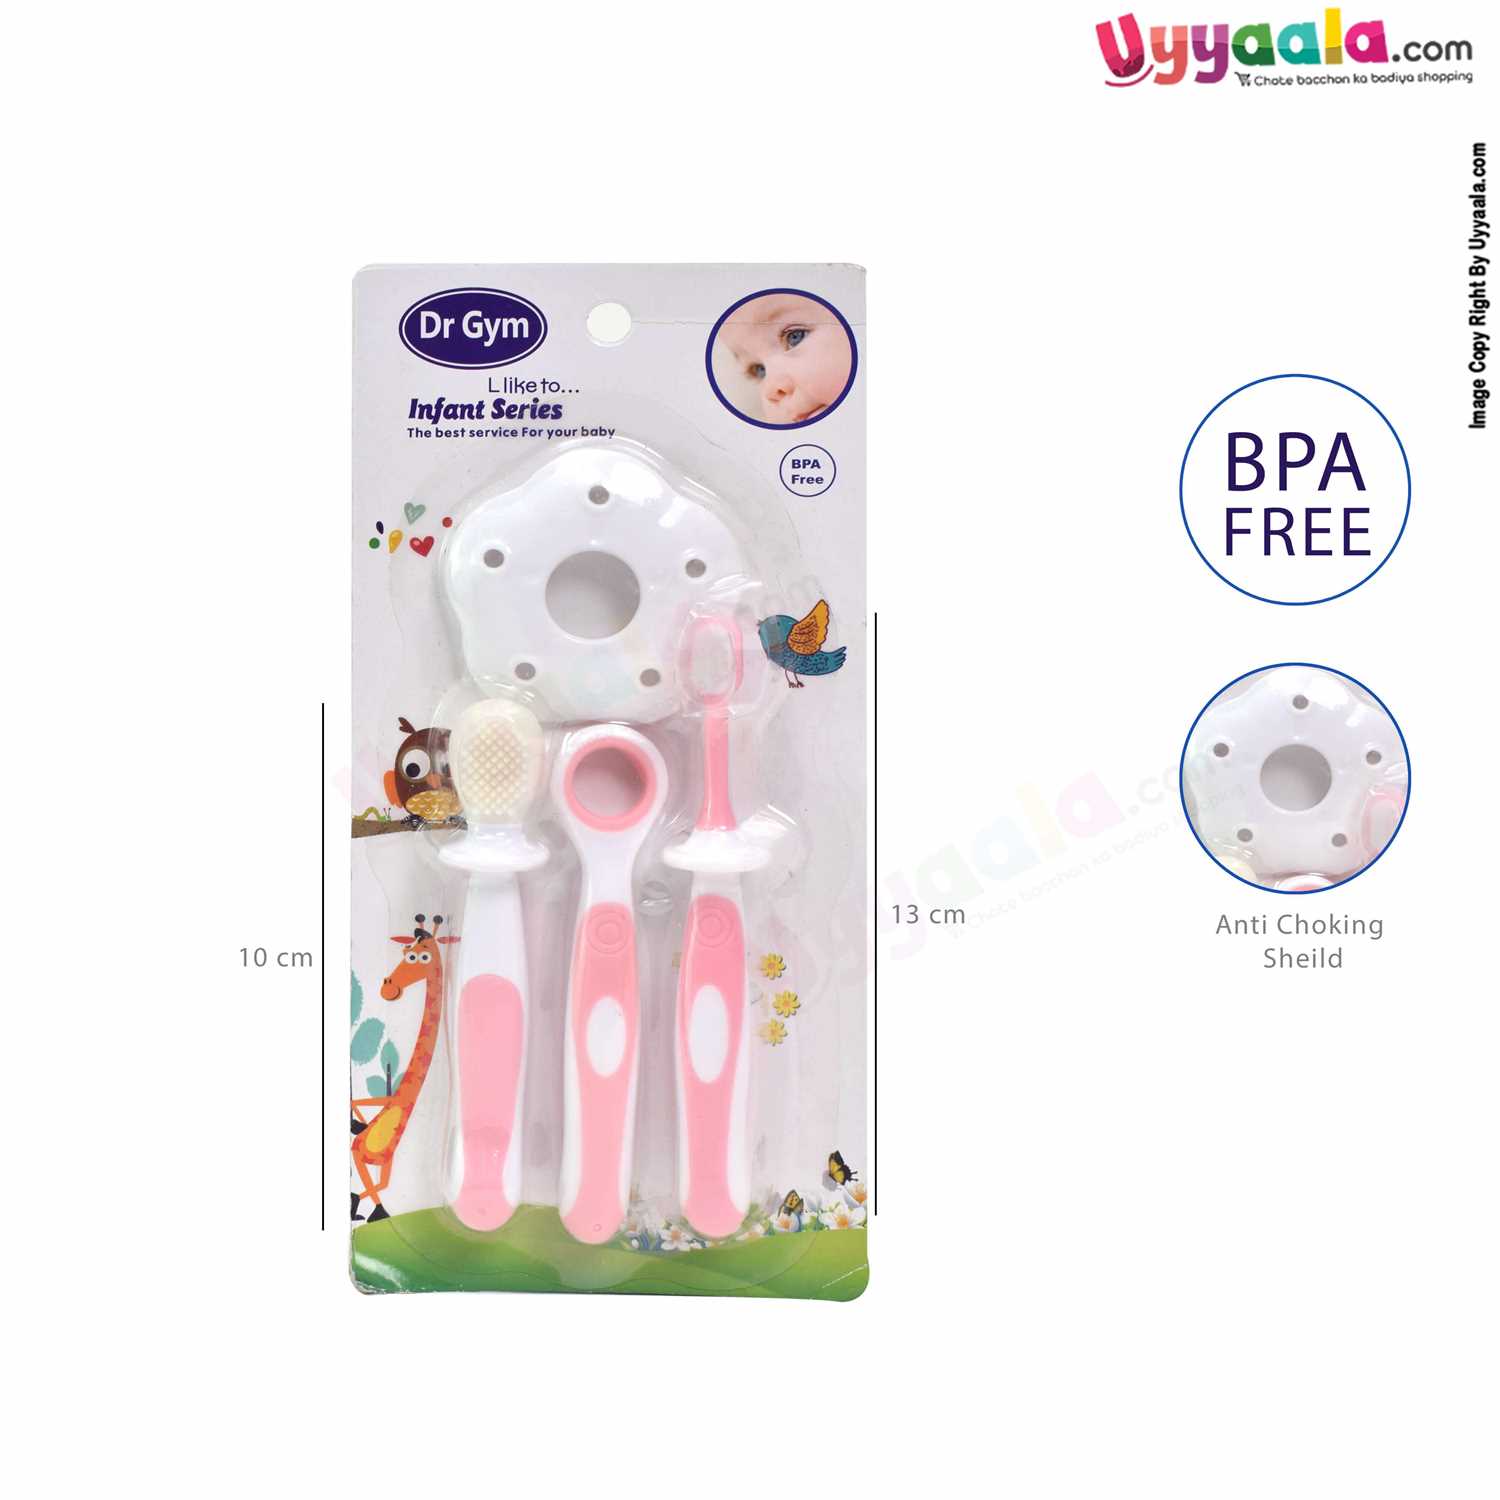 DR GYM Infant Series Toothbrush Set with Anti-choking shield fits firmly for brushes